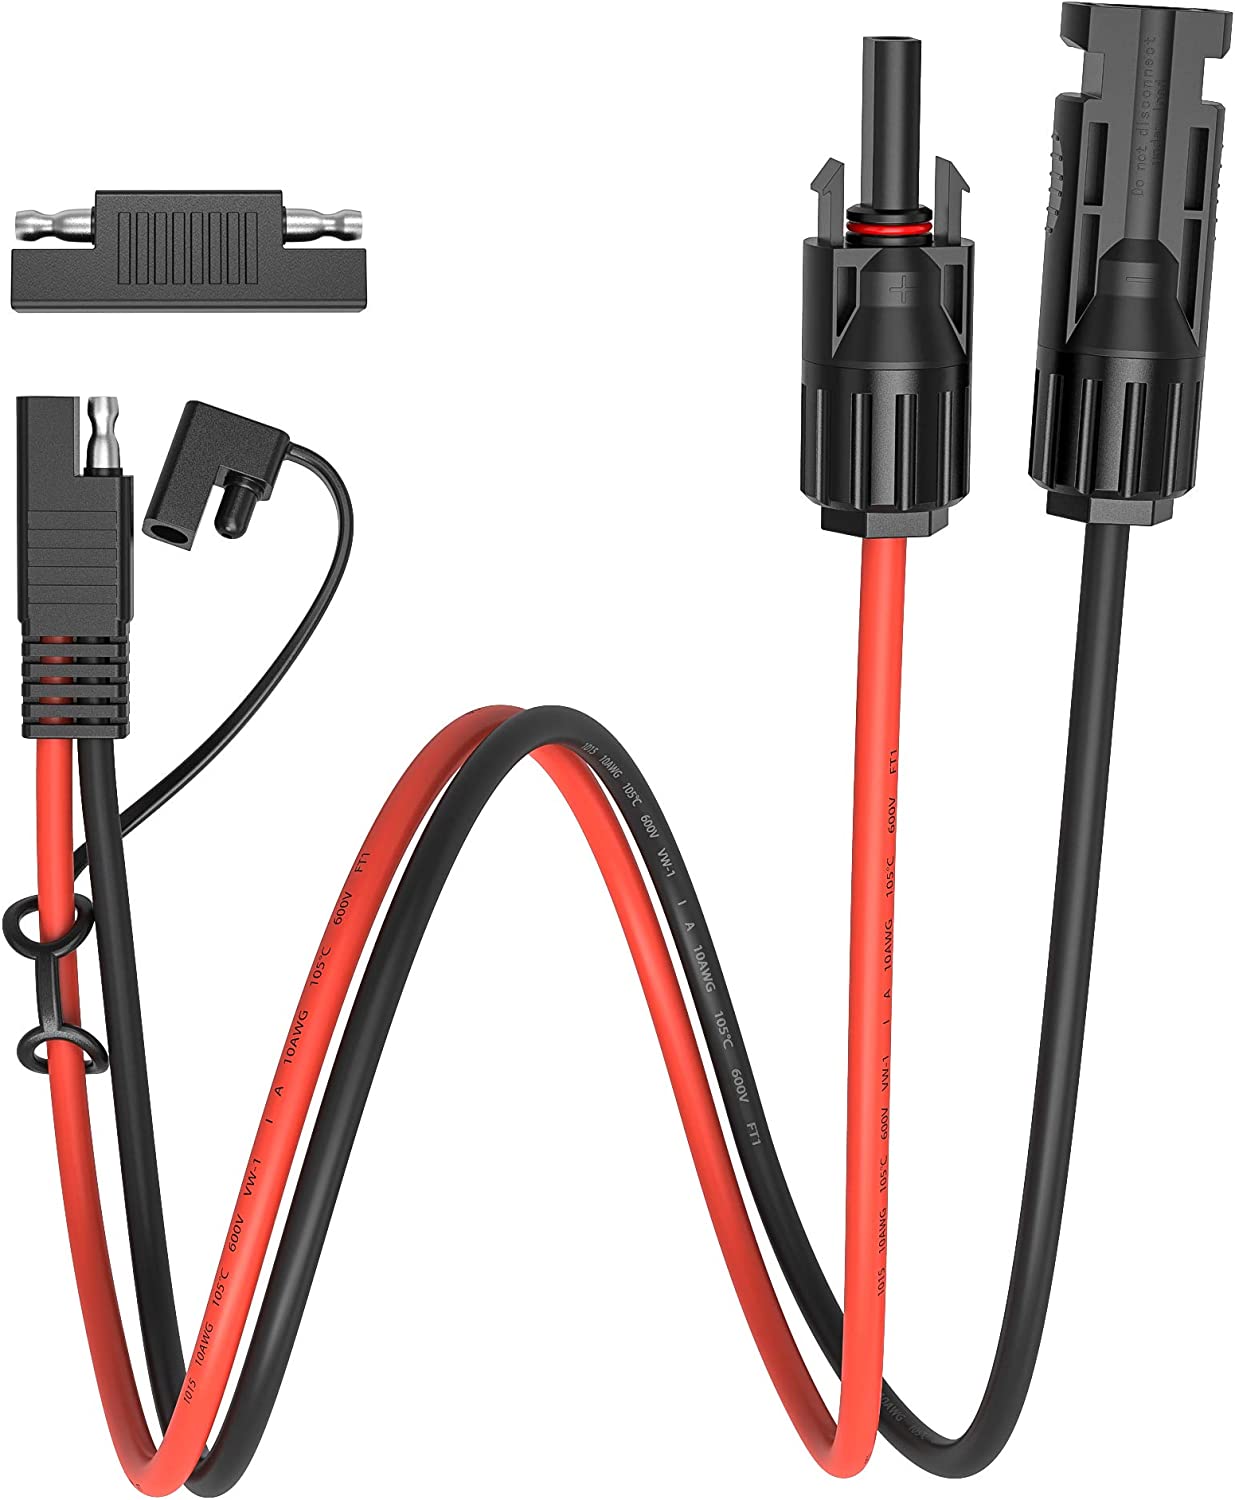 10 AWG SAE to SAE Extension Cable